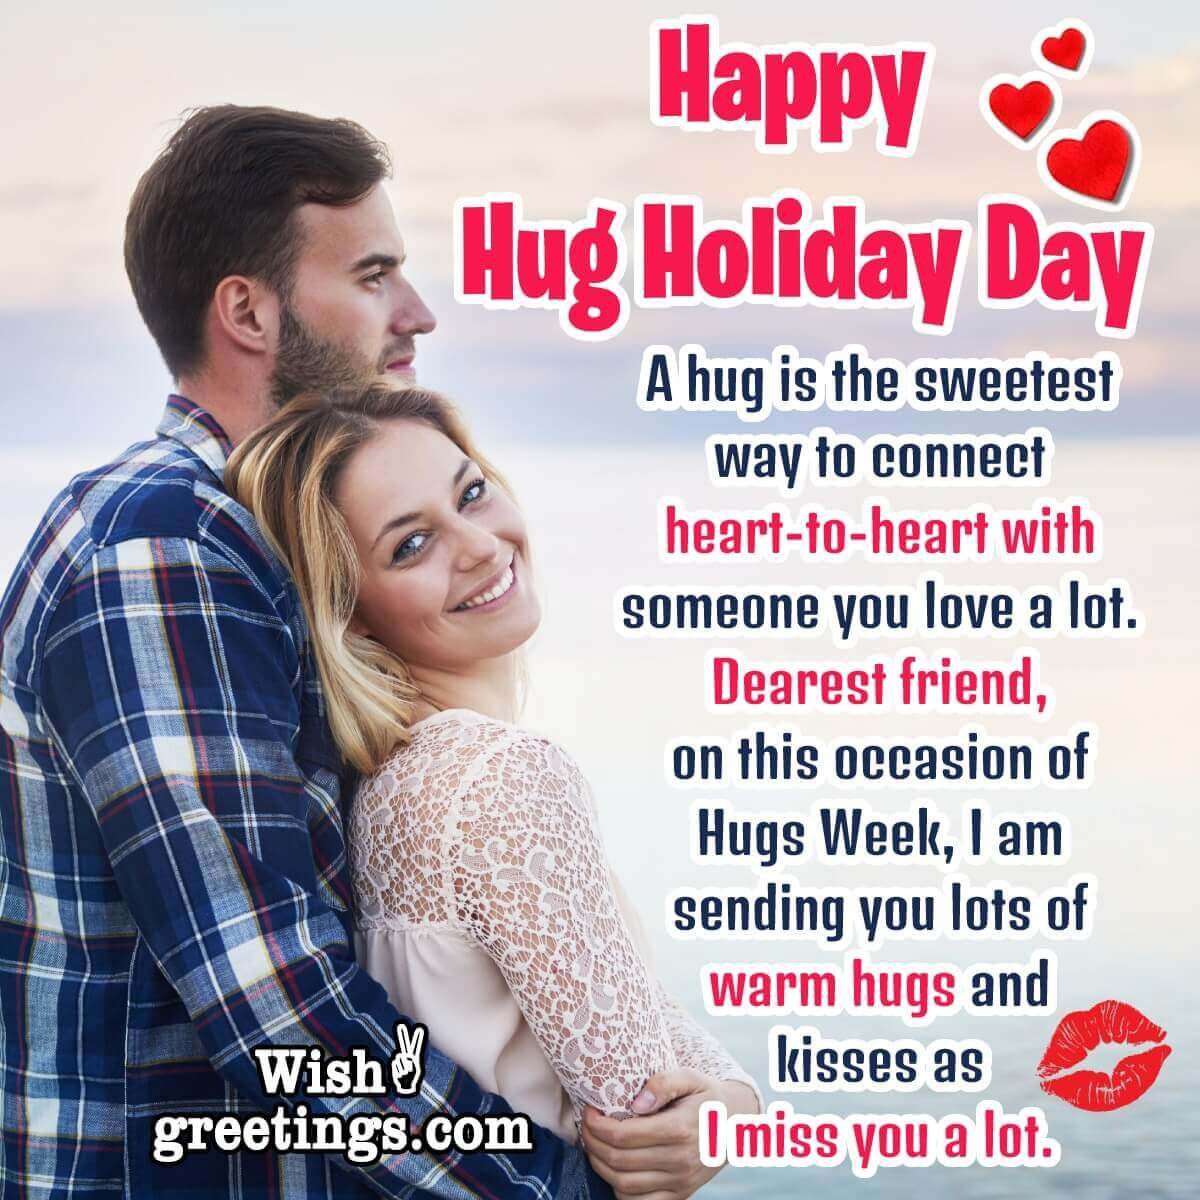 Hug Holiday Day Wishes Messages - Wish Greetings